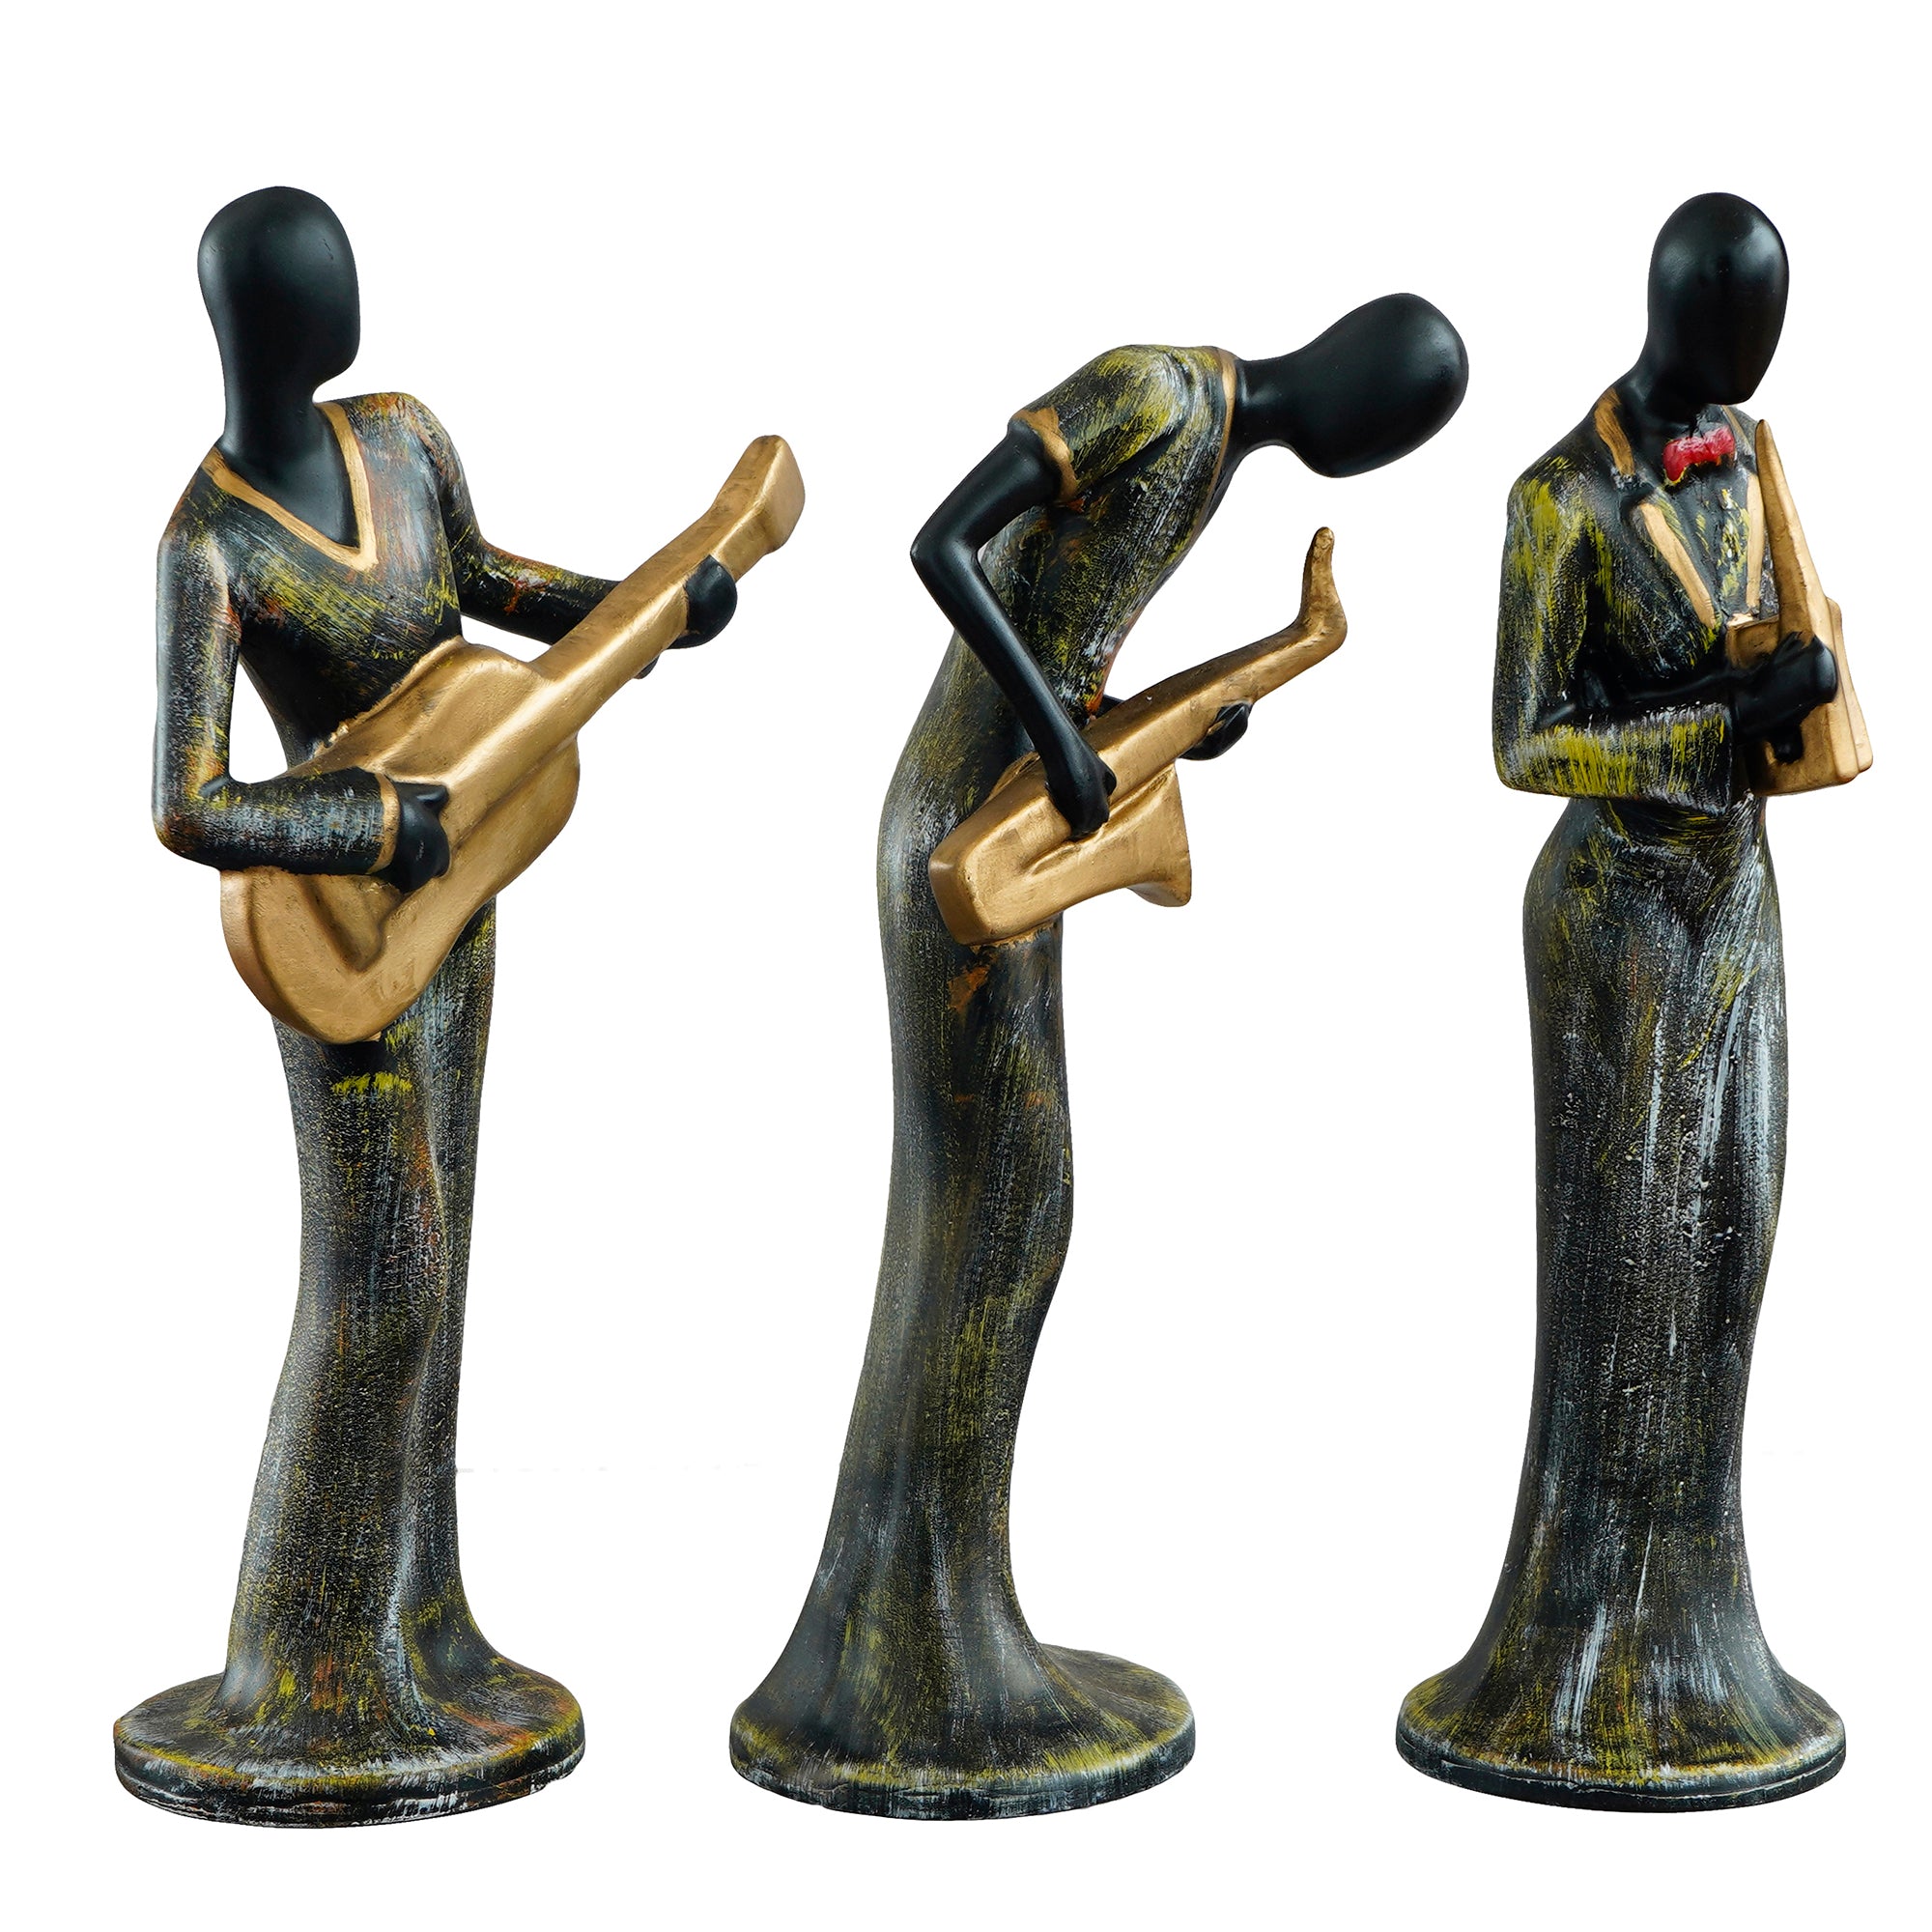 Grey and Black Polyresin Set of 3 Ladies figurines Playing Wind, Guitar,Saxophone Musical Instrument Handcrafted Decorative Showpiece 4